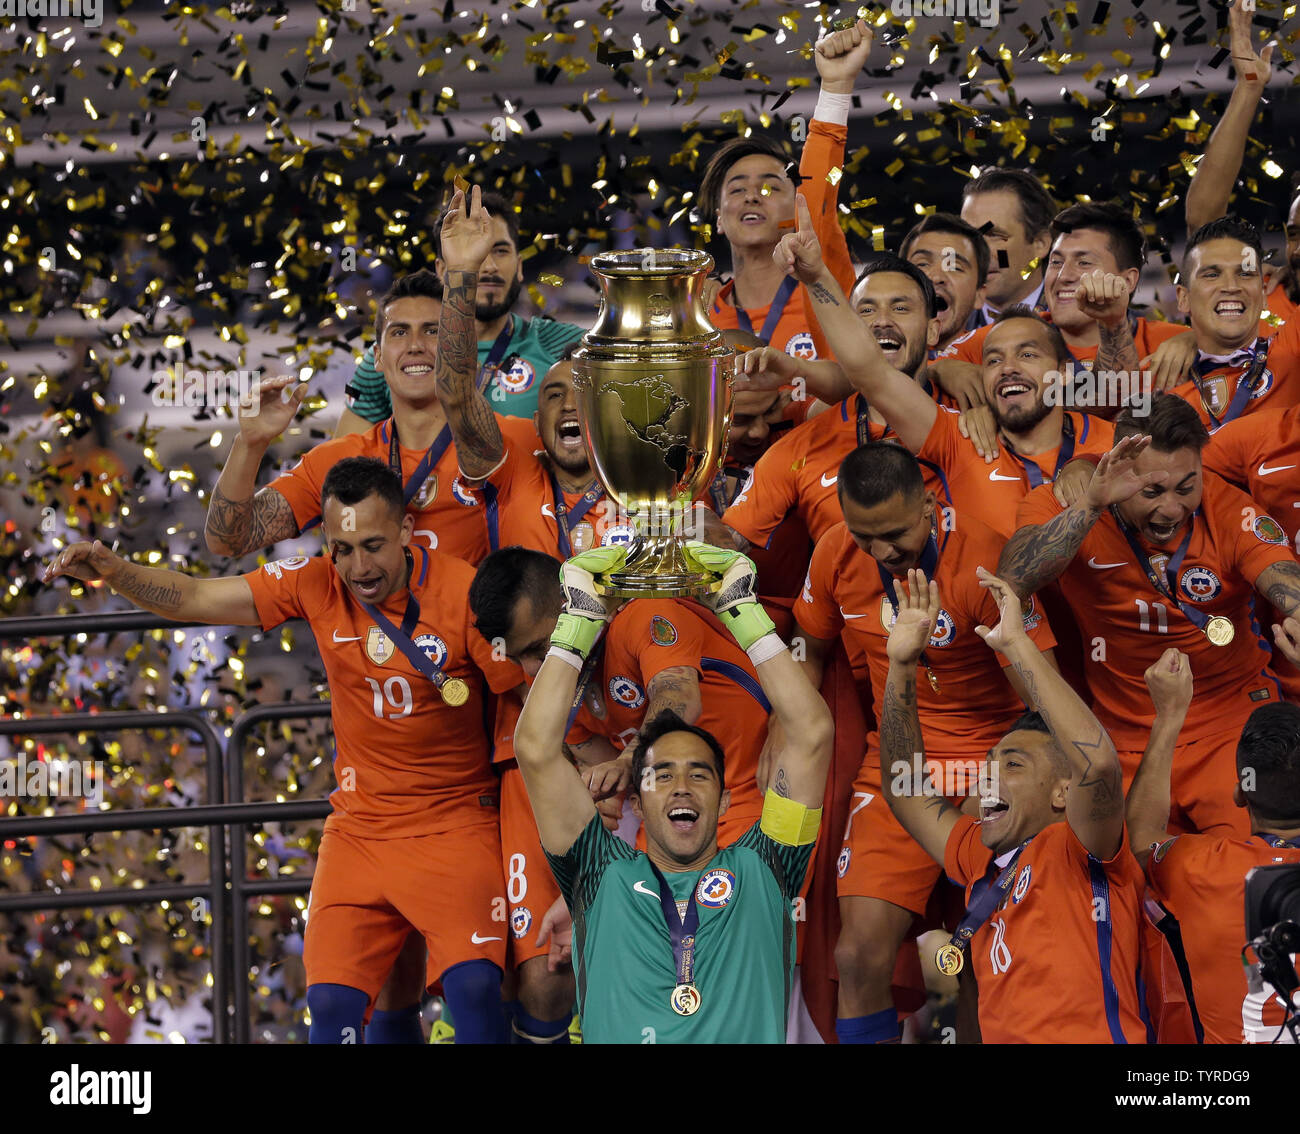 Chile goalkeeper Claudio Bravo (1) holds the cup as his teammates celebrate after beating Argentina in the penalty kicks phase at the Copa America Centenario USA 2016 Finals at MetLife Stadium in East Rutherford, New Jersey on June 26, 2016.      Photo by Ray Stubblebine/UPI Stock Photo